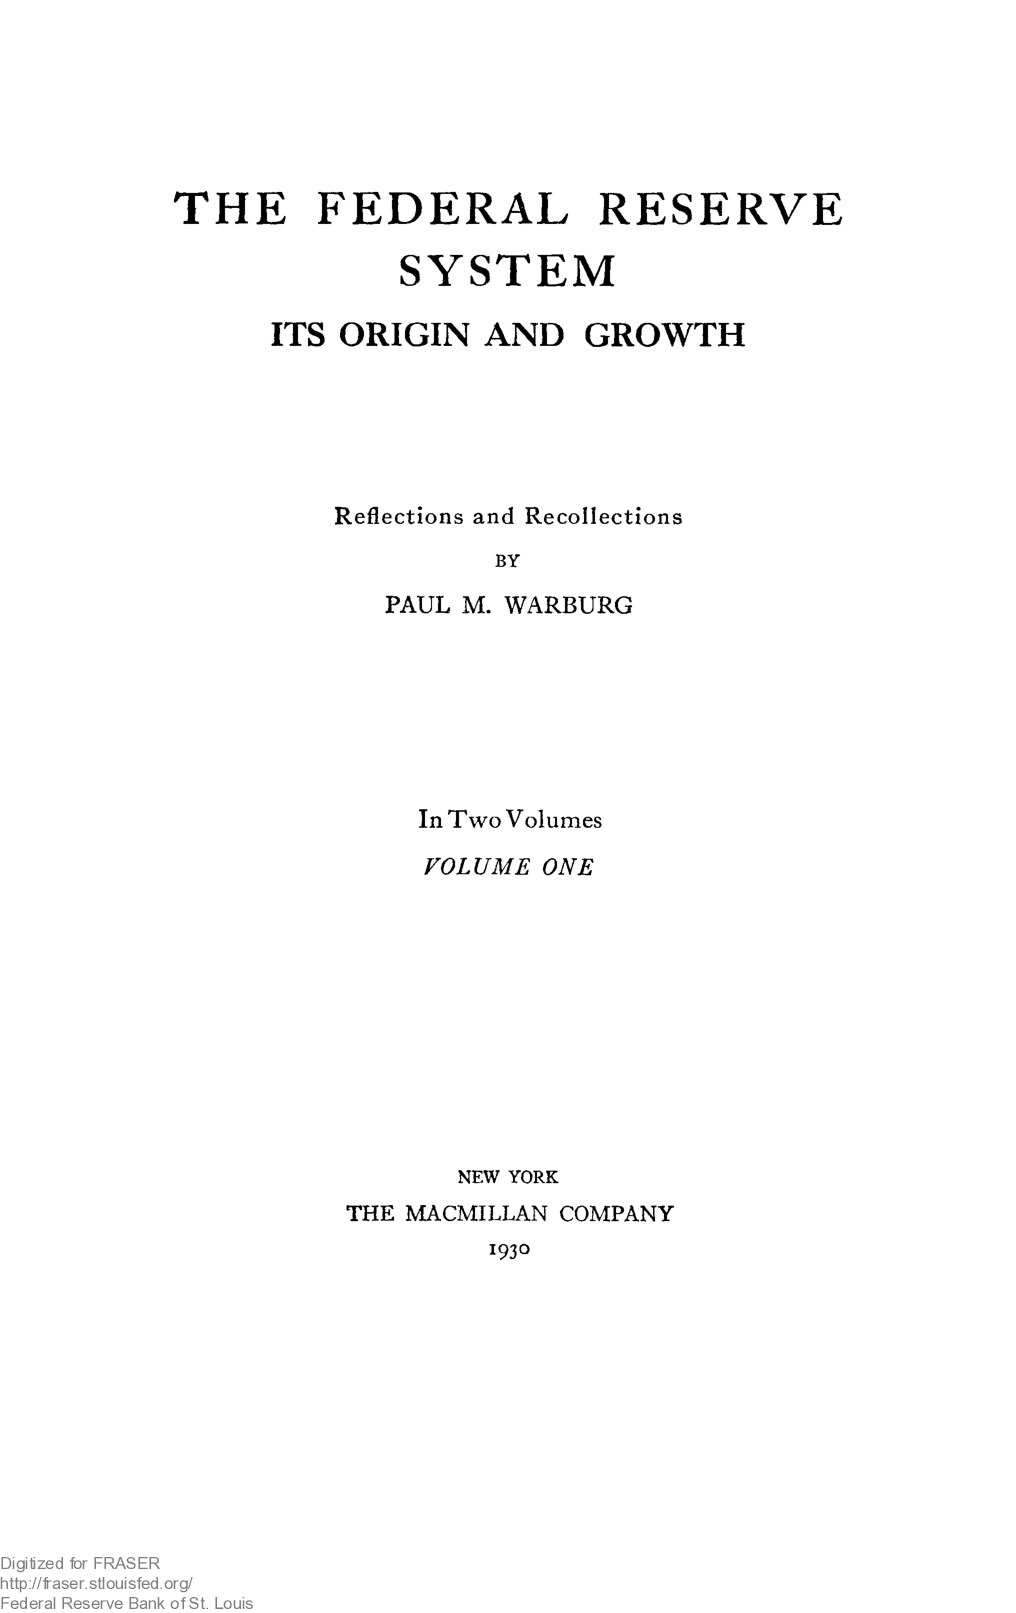 Federal Reserve System: Its Origin and Growth